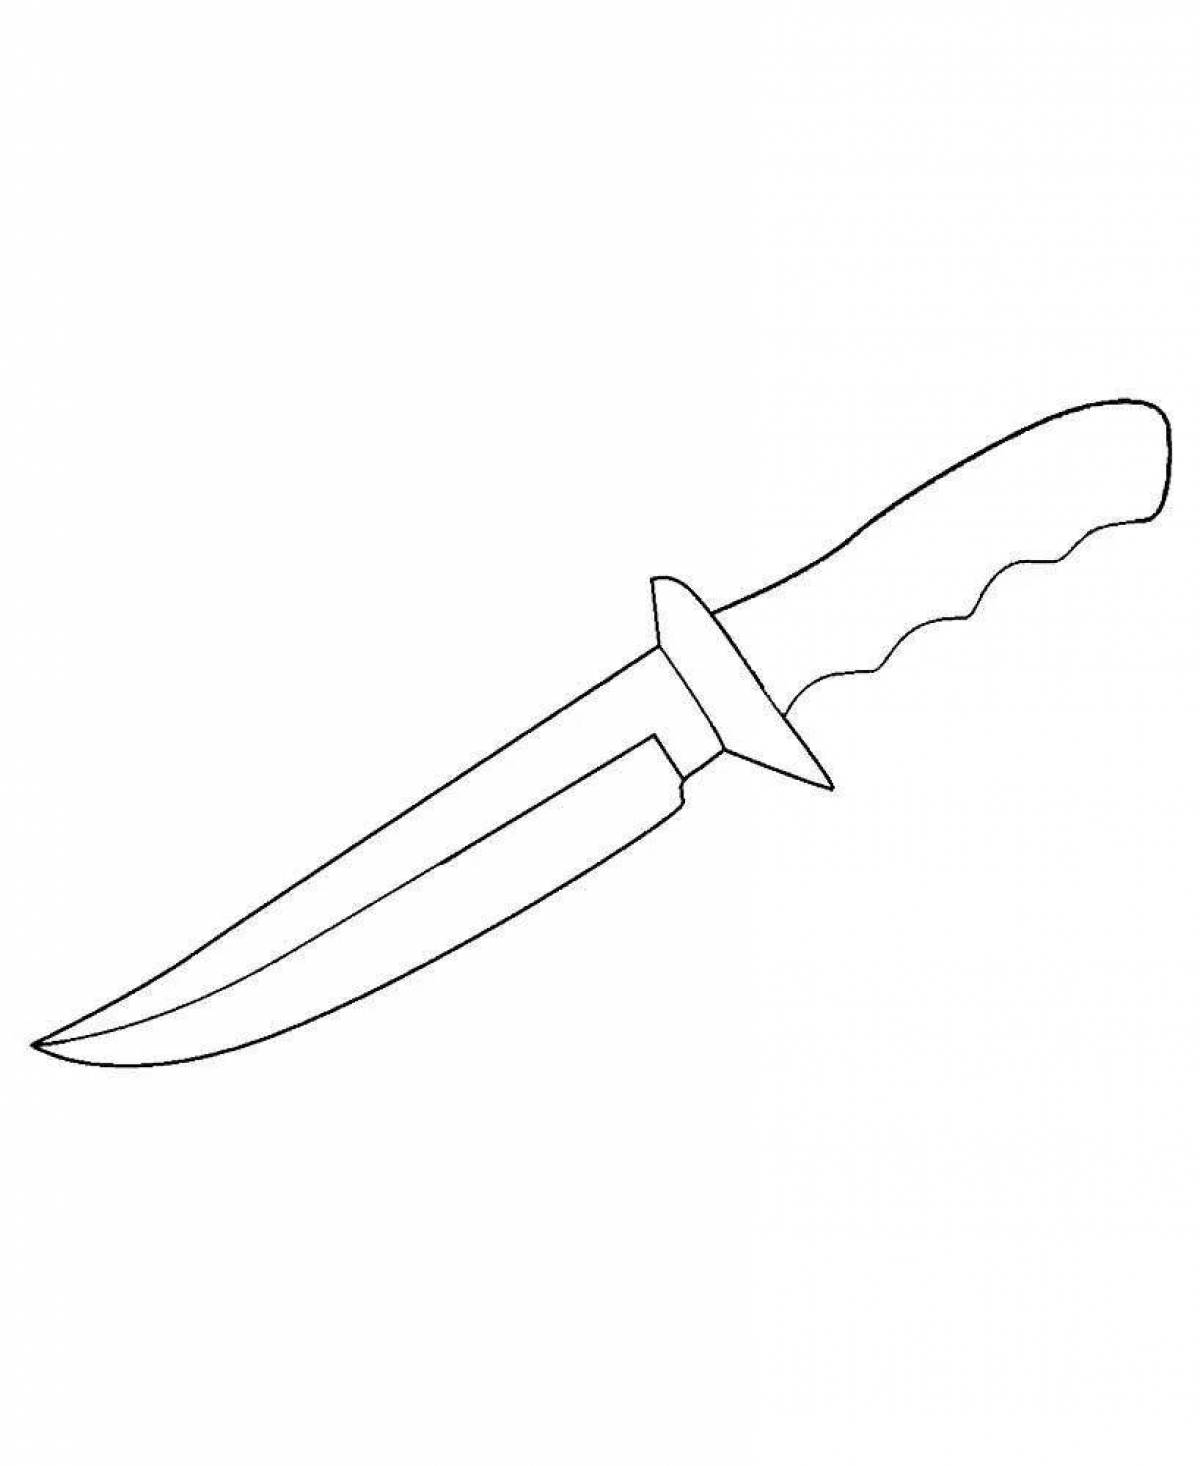 Complex daggers coloring page